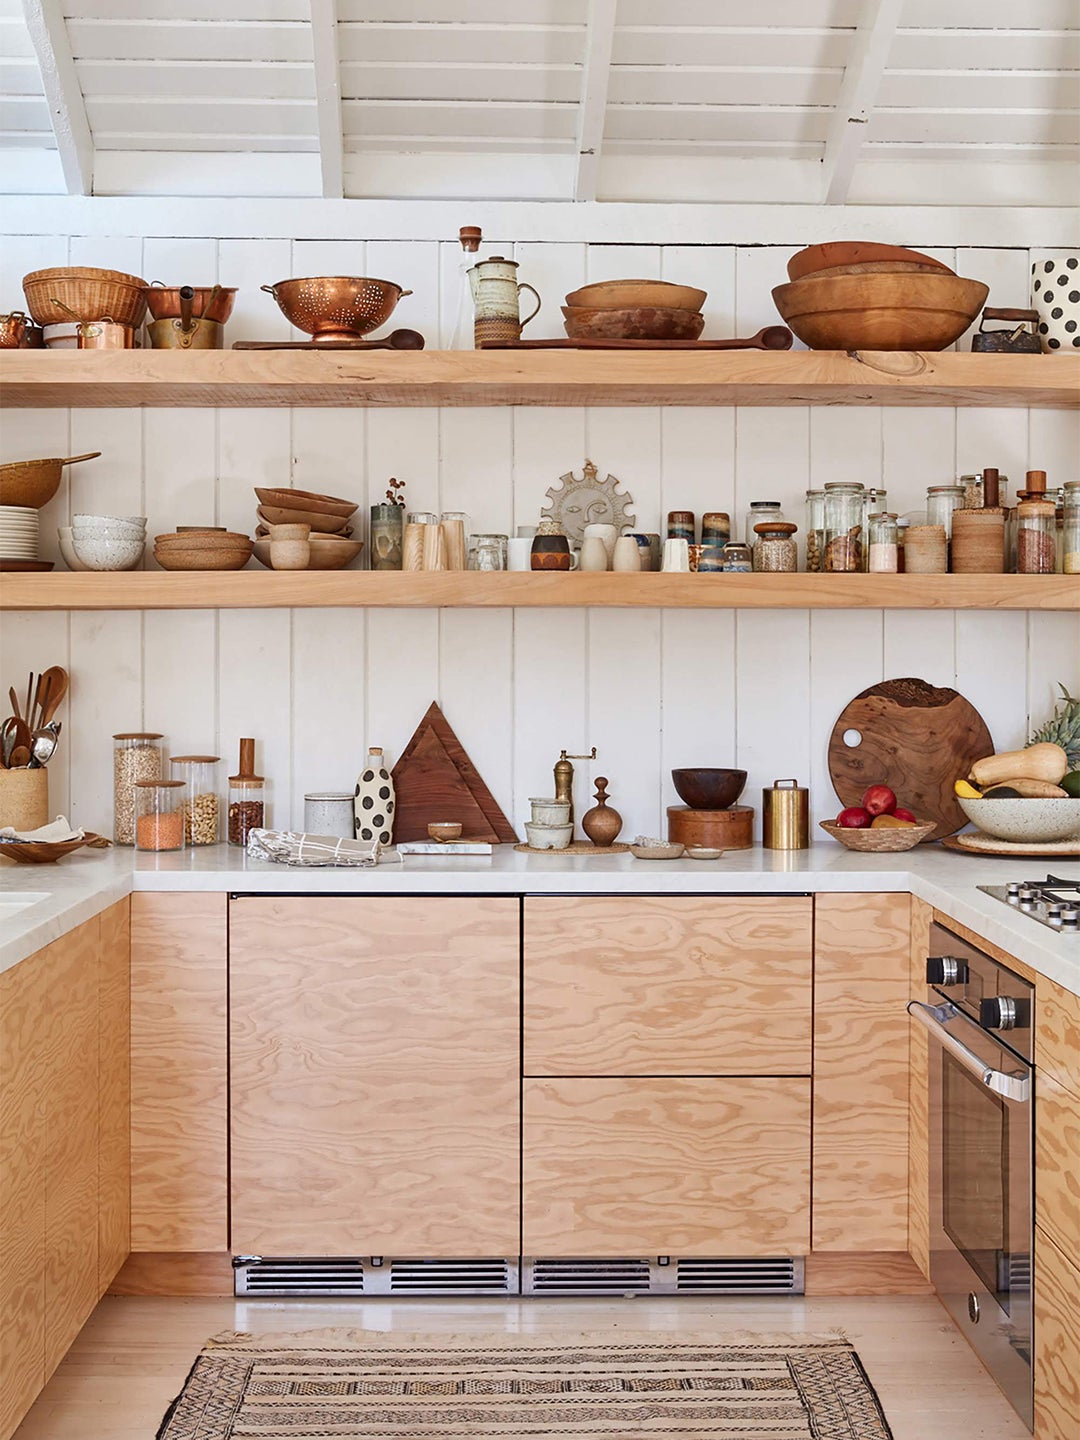 plywood kitchen cabinets and open shelving